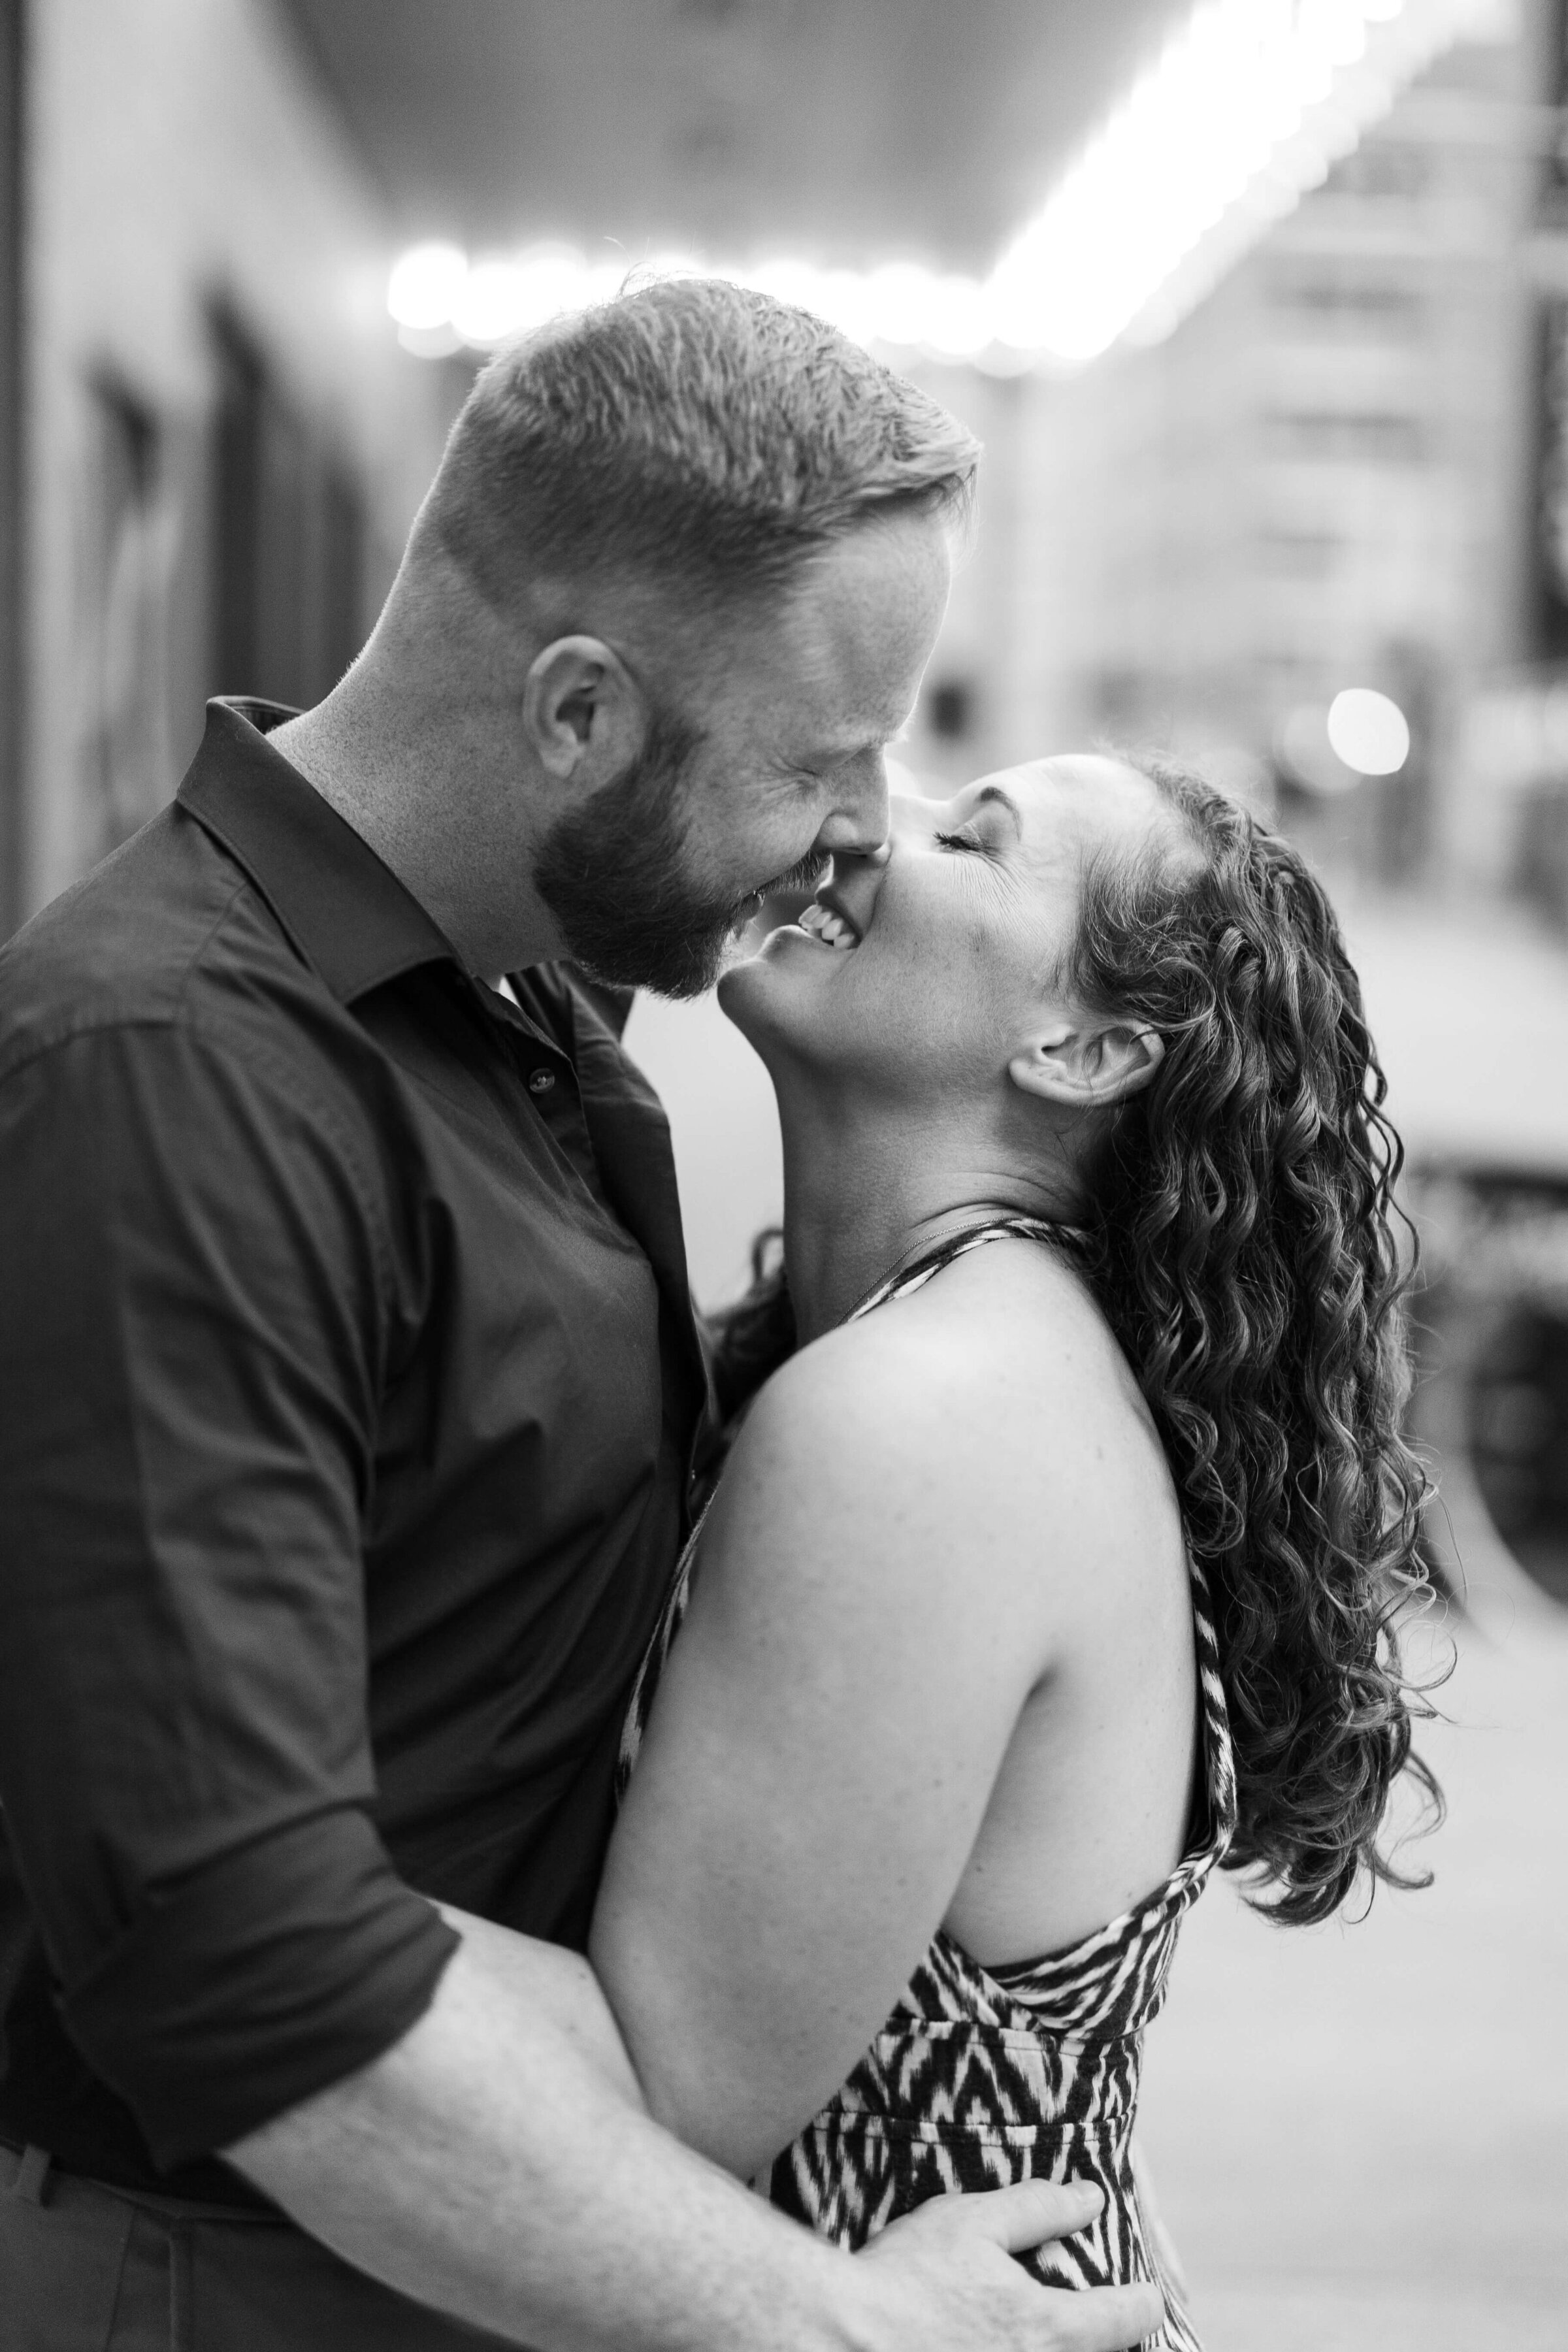 A man and woman almost kiss and laugh together. It's a black and white photo. They are in downtown cincinnati.